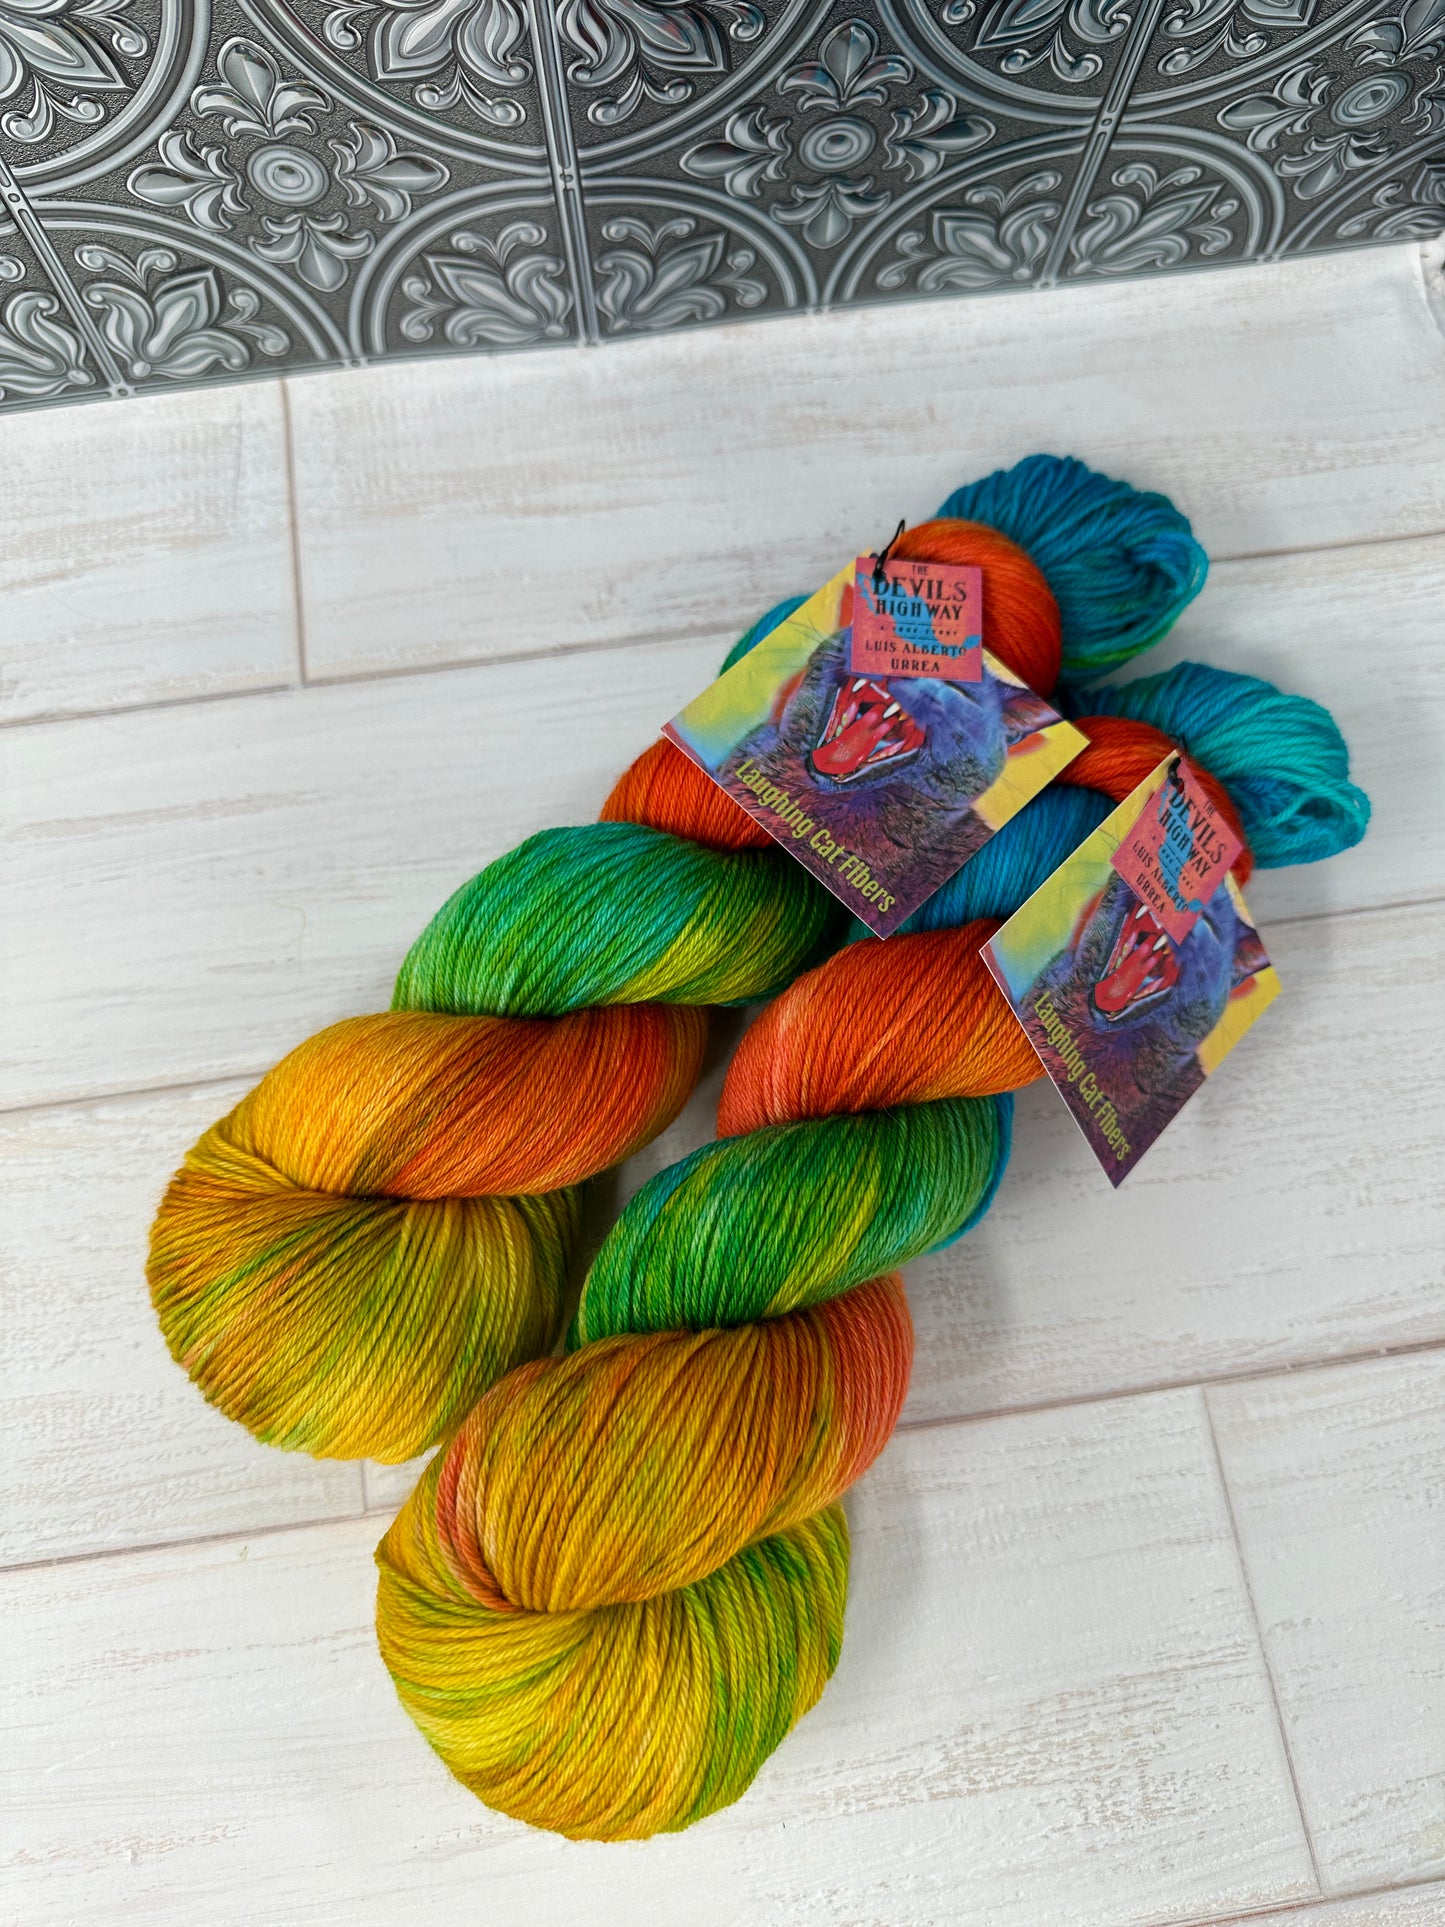 Banned Books Yarn Club: “The Devil's Highway” on Various Yarn Bases